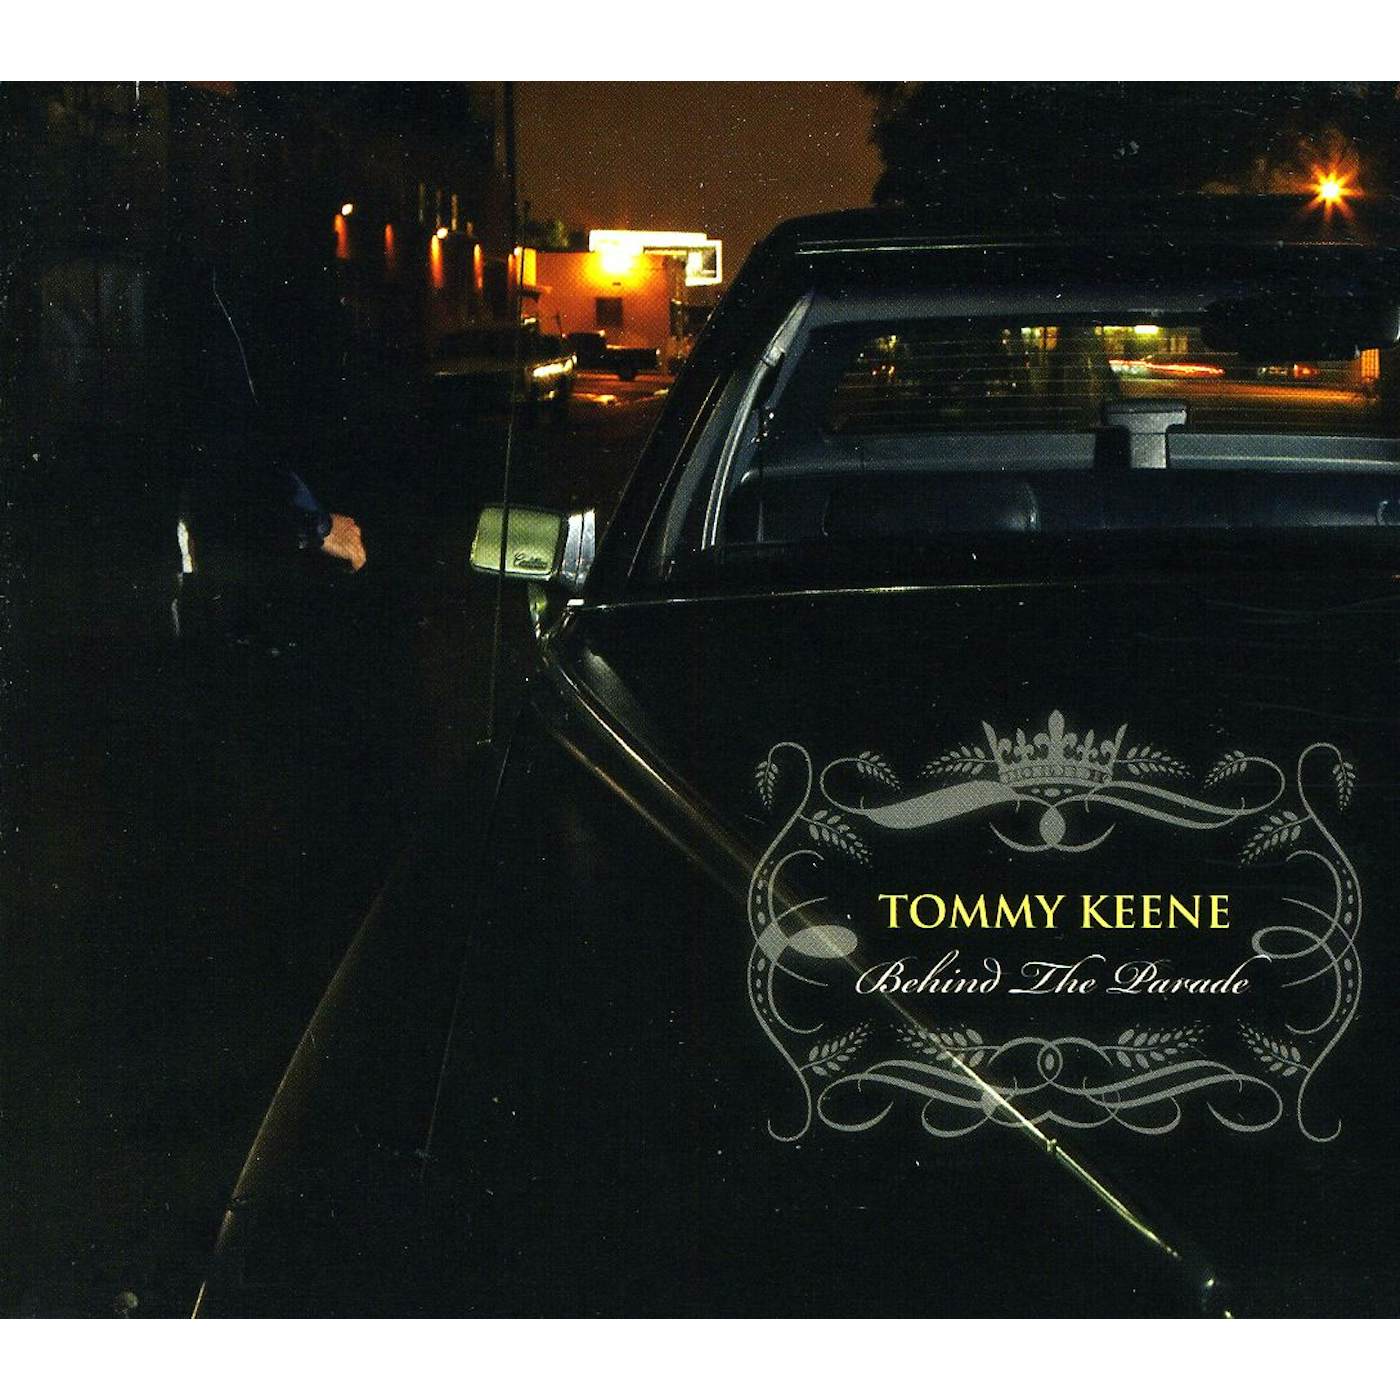 Tommy Keene BEHIND THE PARADE CD